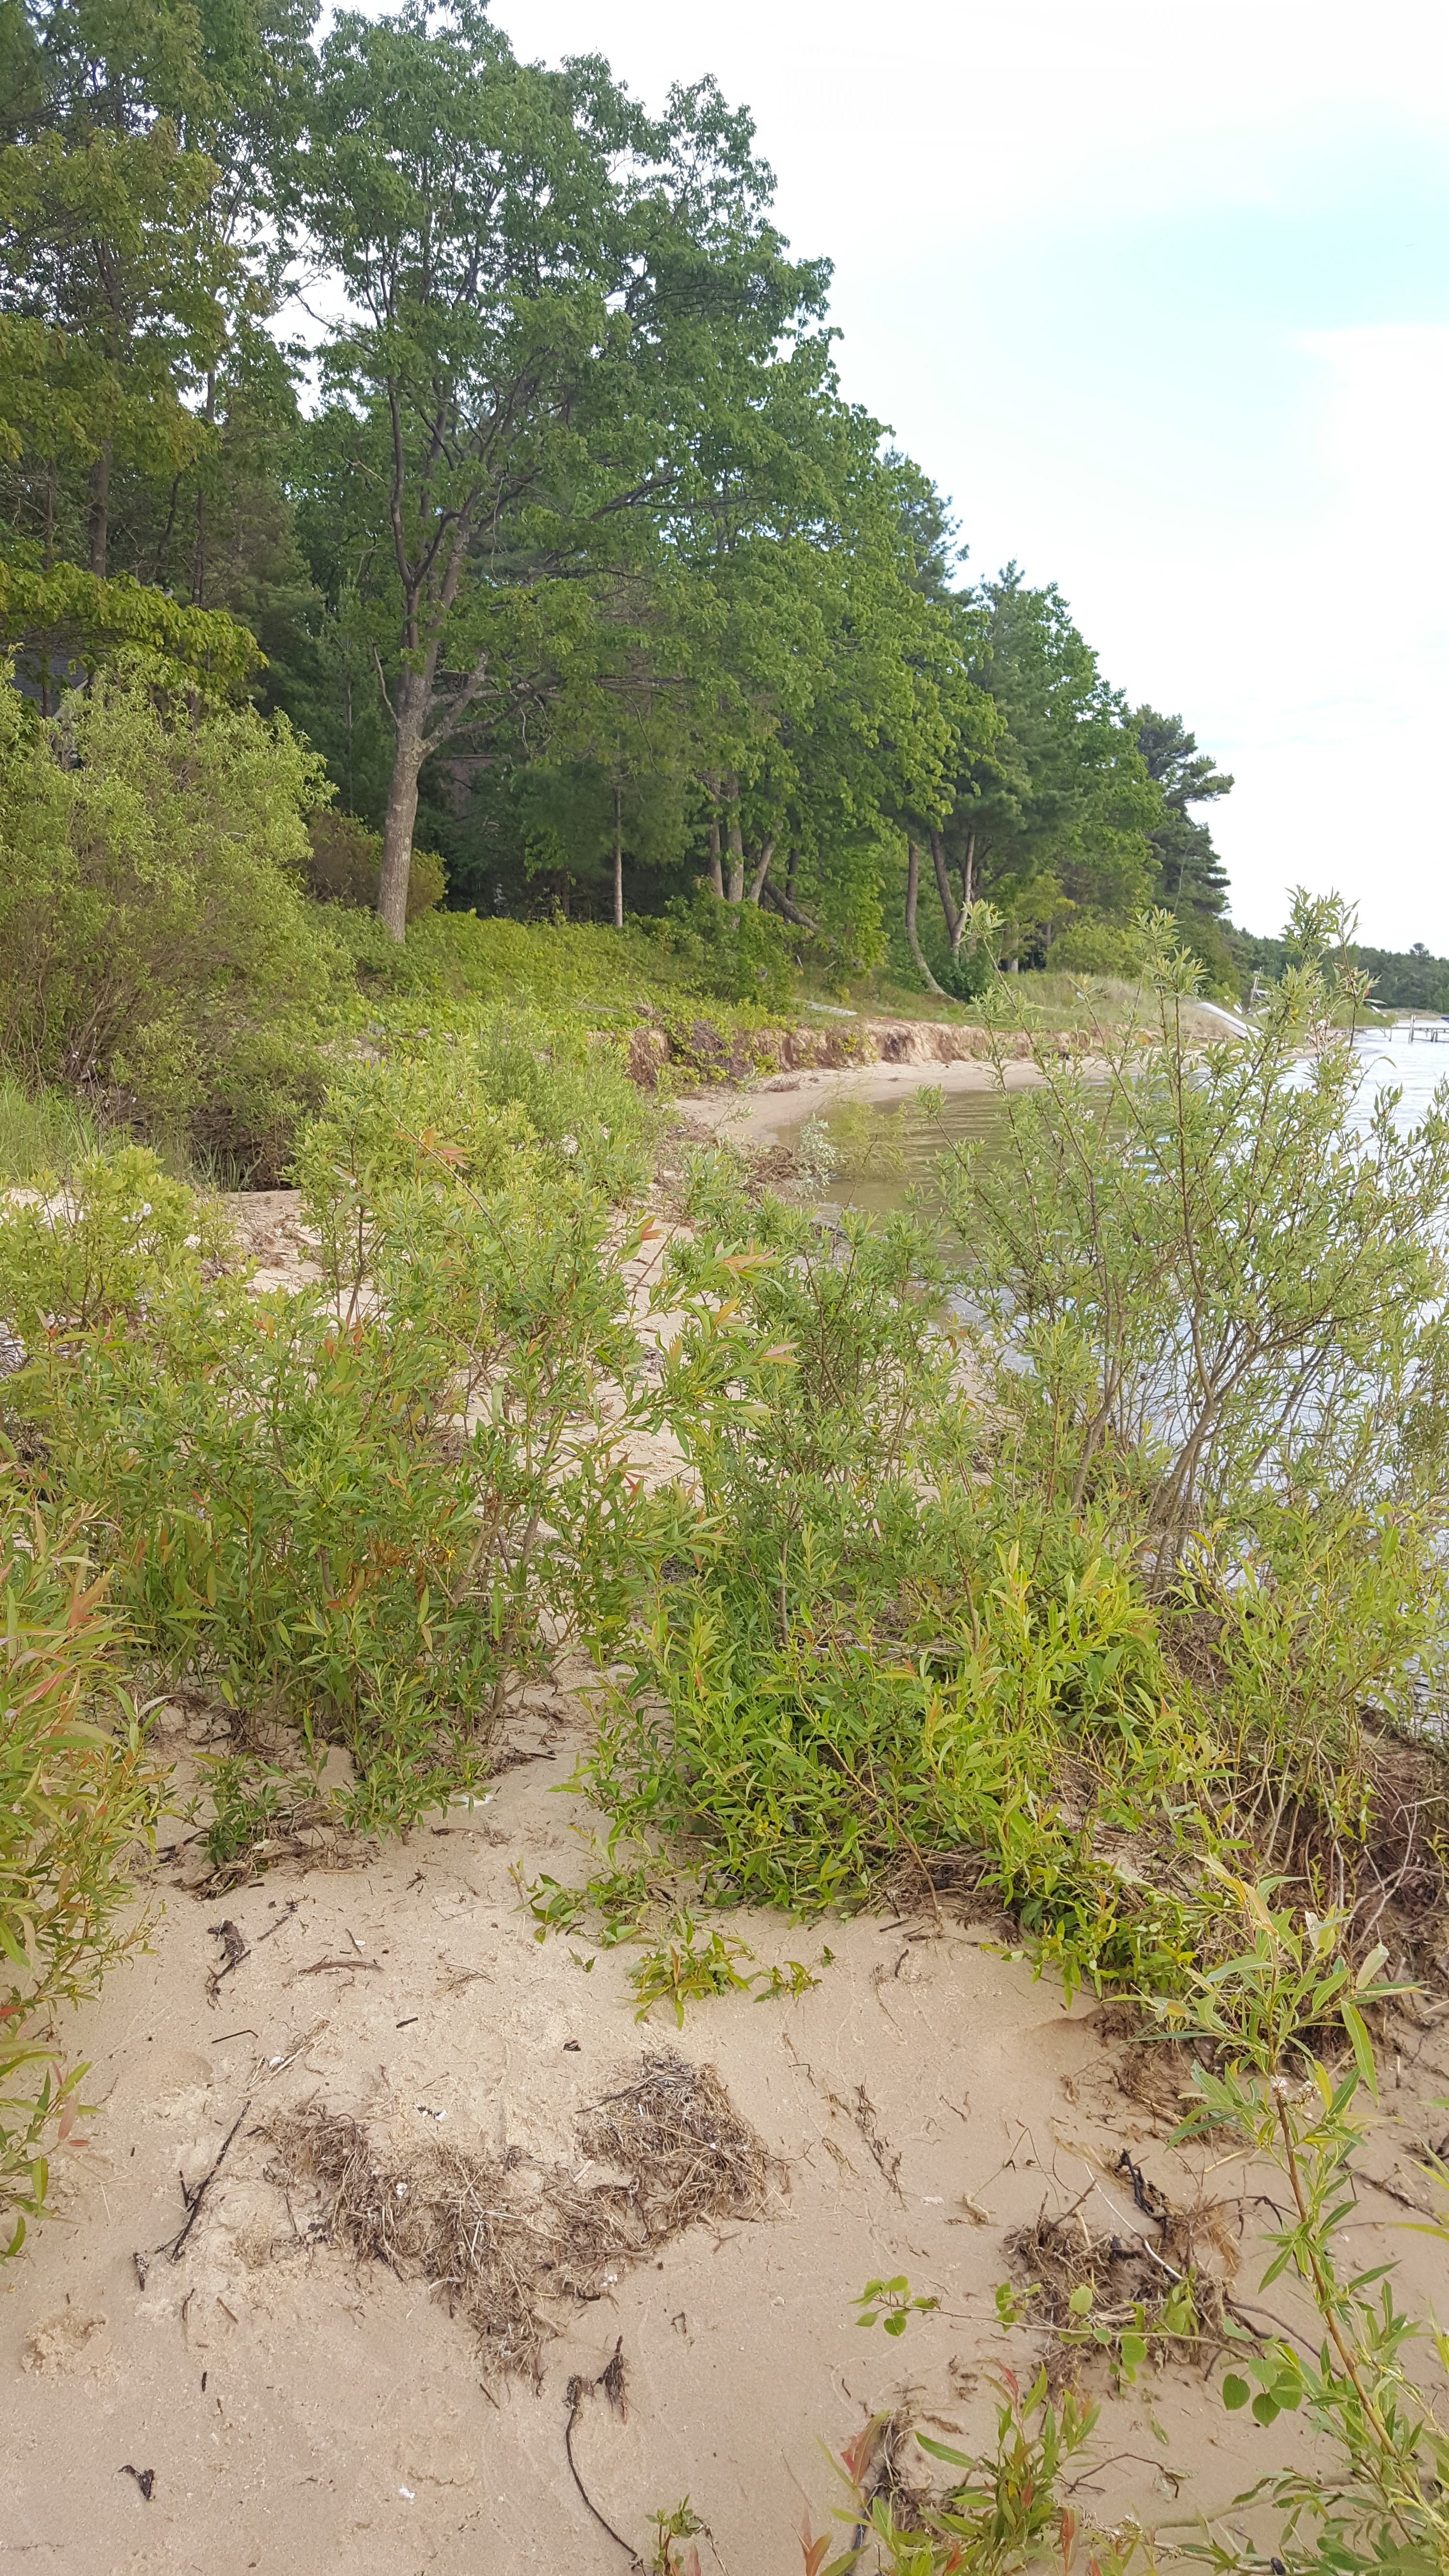 Bluff Erosion Approaches The Tree Line